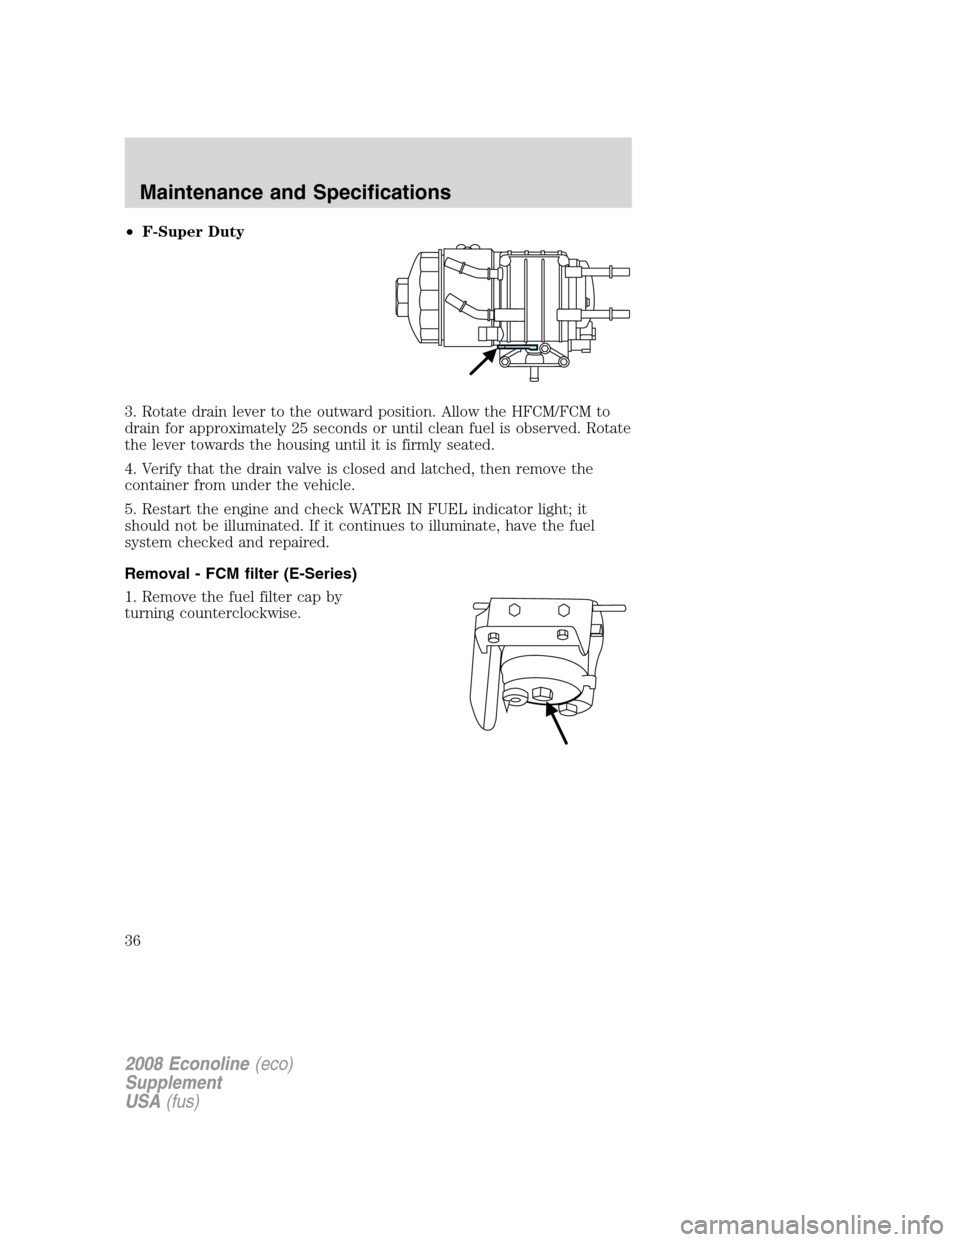 FORD SUPER DUTY 2008 2.G Diesel Supplement Manual •F-Super Duty
3. Rotate drain lever to the outward position. Allow the HFCM/FCM to
drain for approximately 25 seconds or until clean fuel is observed. Rotate
the lever towards the housing until it i